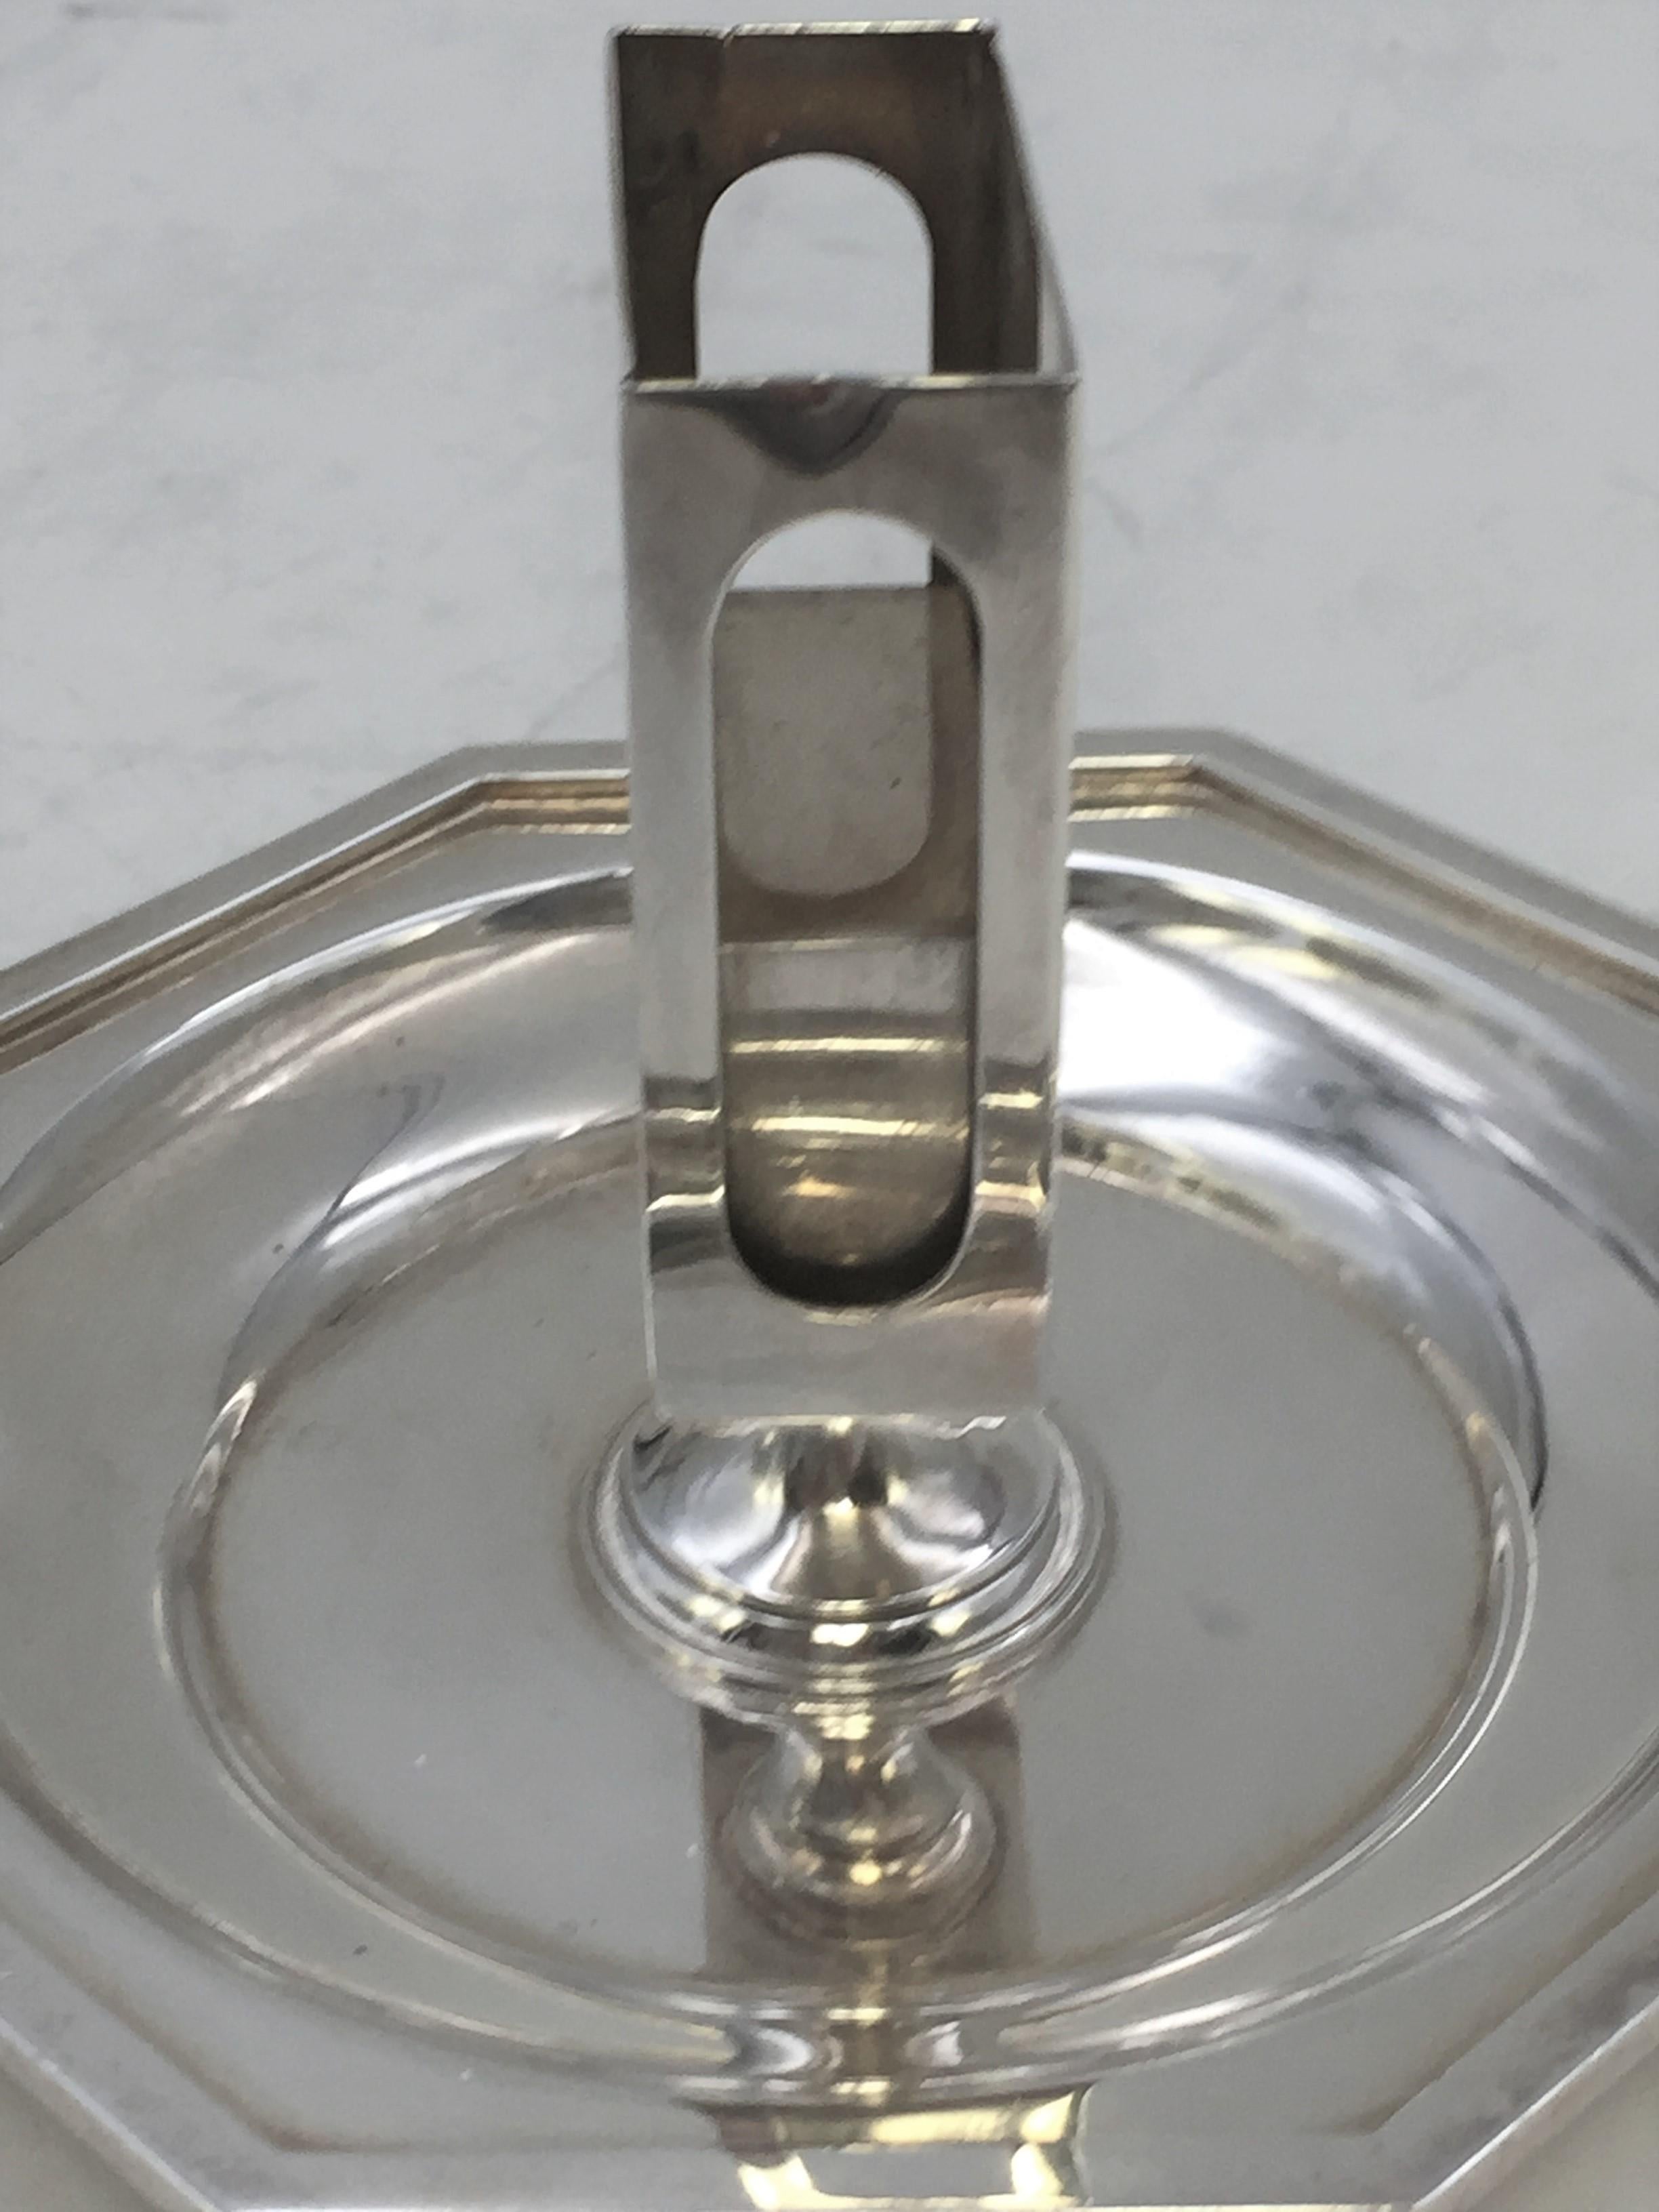 Bulgari sterling silver match striker (3 in height; 4 ¾ in diameter) with beautiful geometric hexagonal base. Extremely rare item because Bulgari typically makes items in gold and rarely makes items in sterling silver. Weighs 7.3 troy ounces.